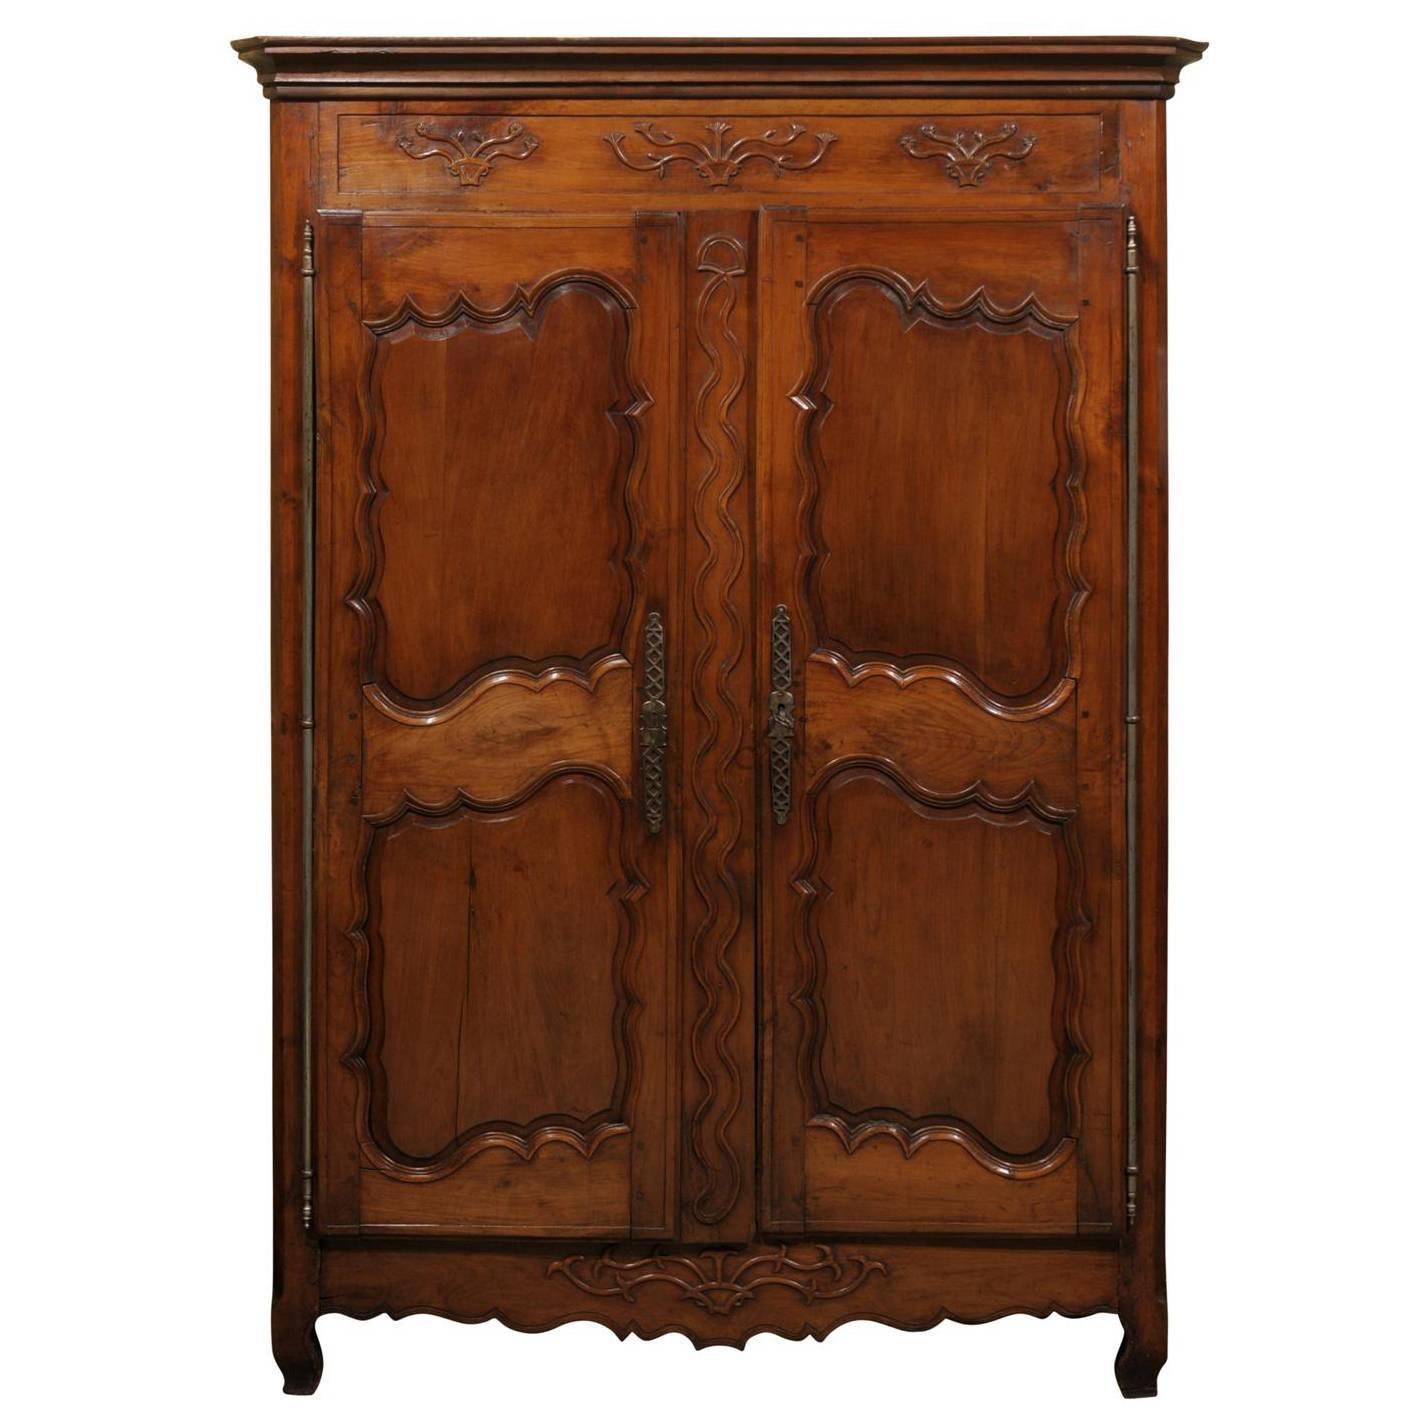 Small 19th Century Cherry Armoire at 1stdibs